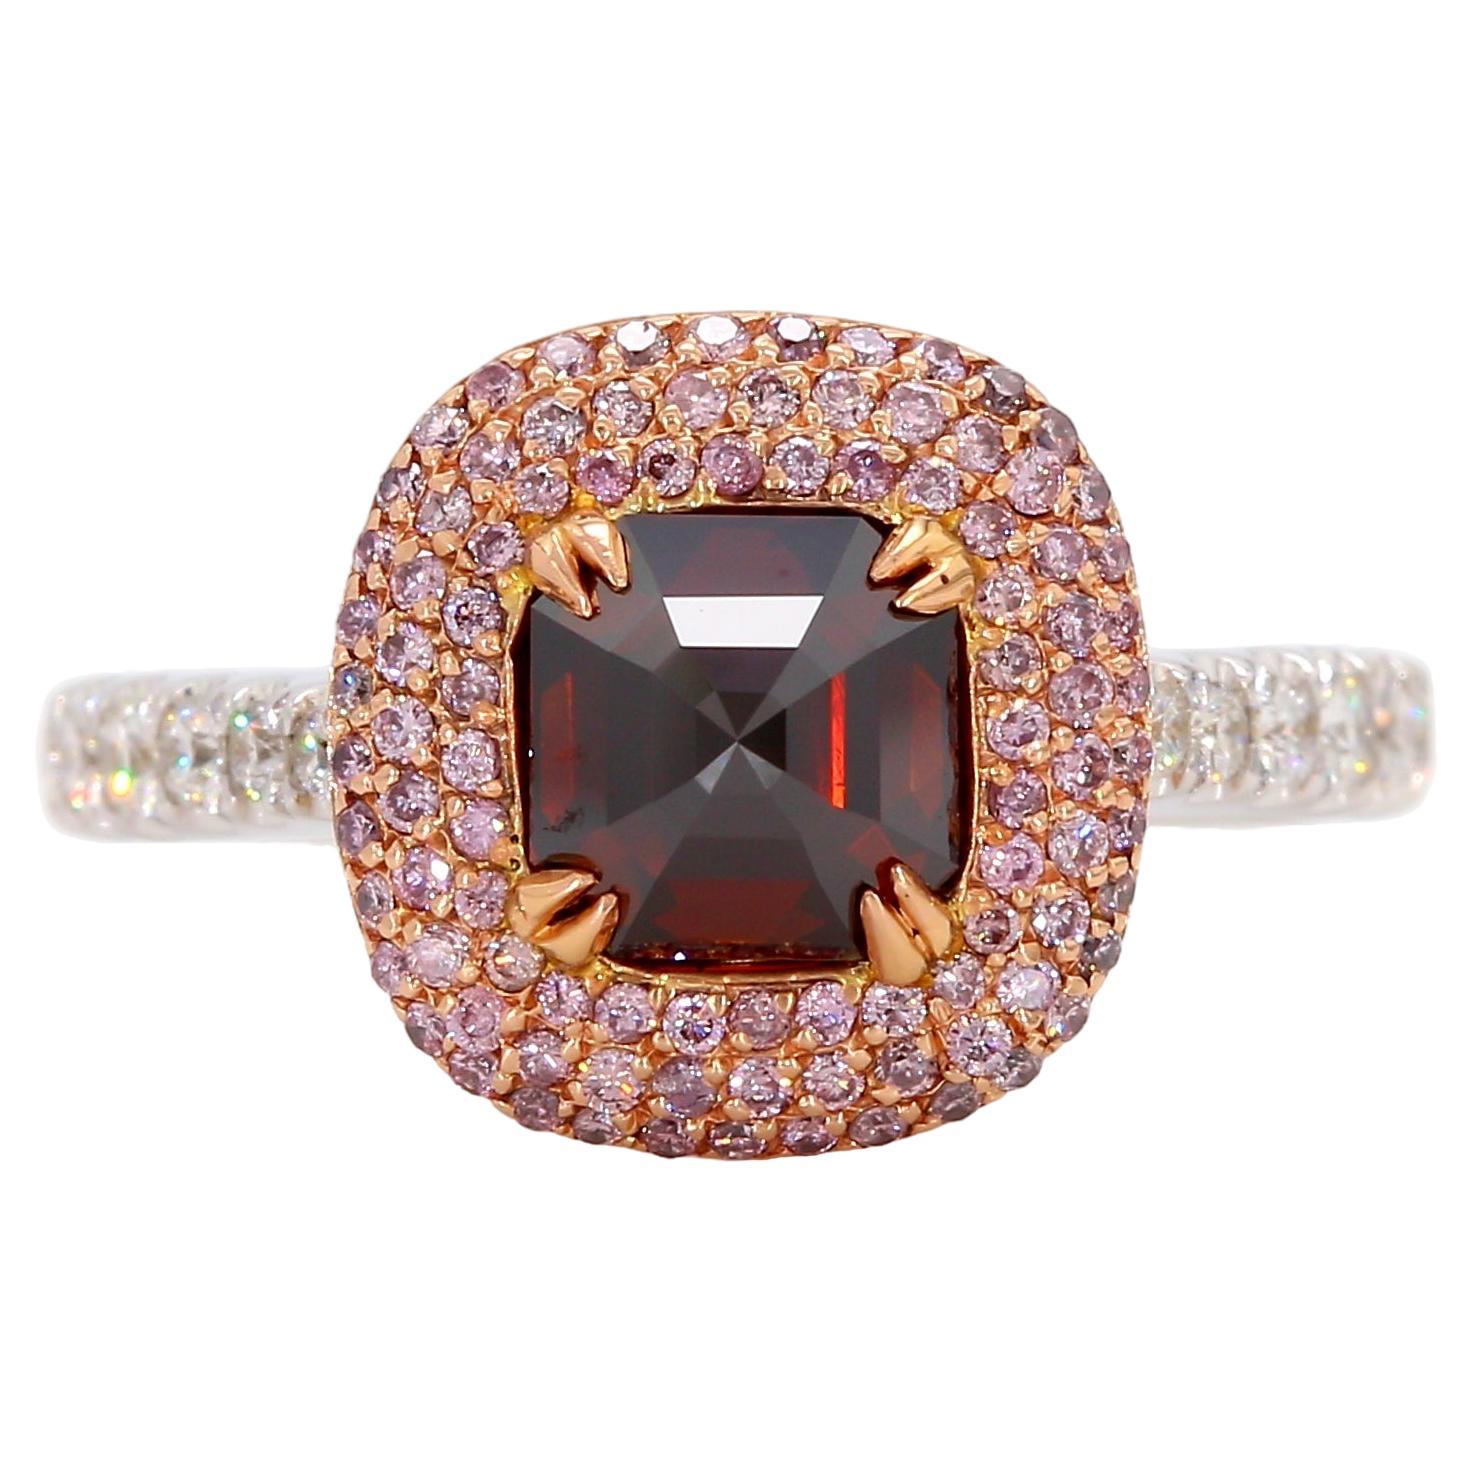 1 + Carart Fancy Red-Brown Diamond Engagement Ring, GIA Certified, 18K Gold. For Sale